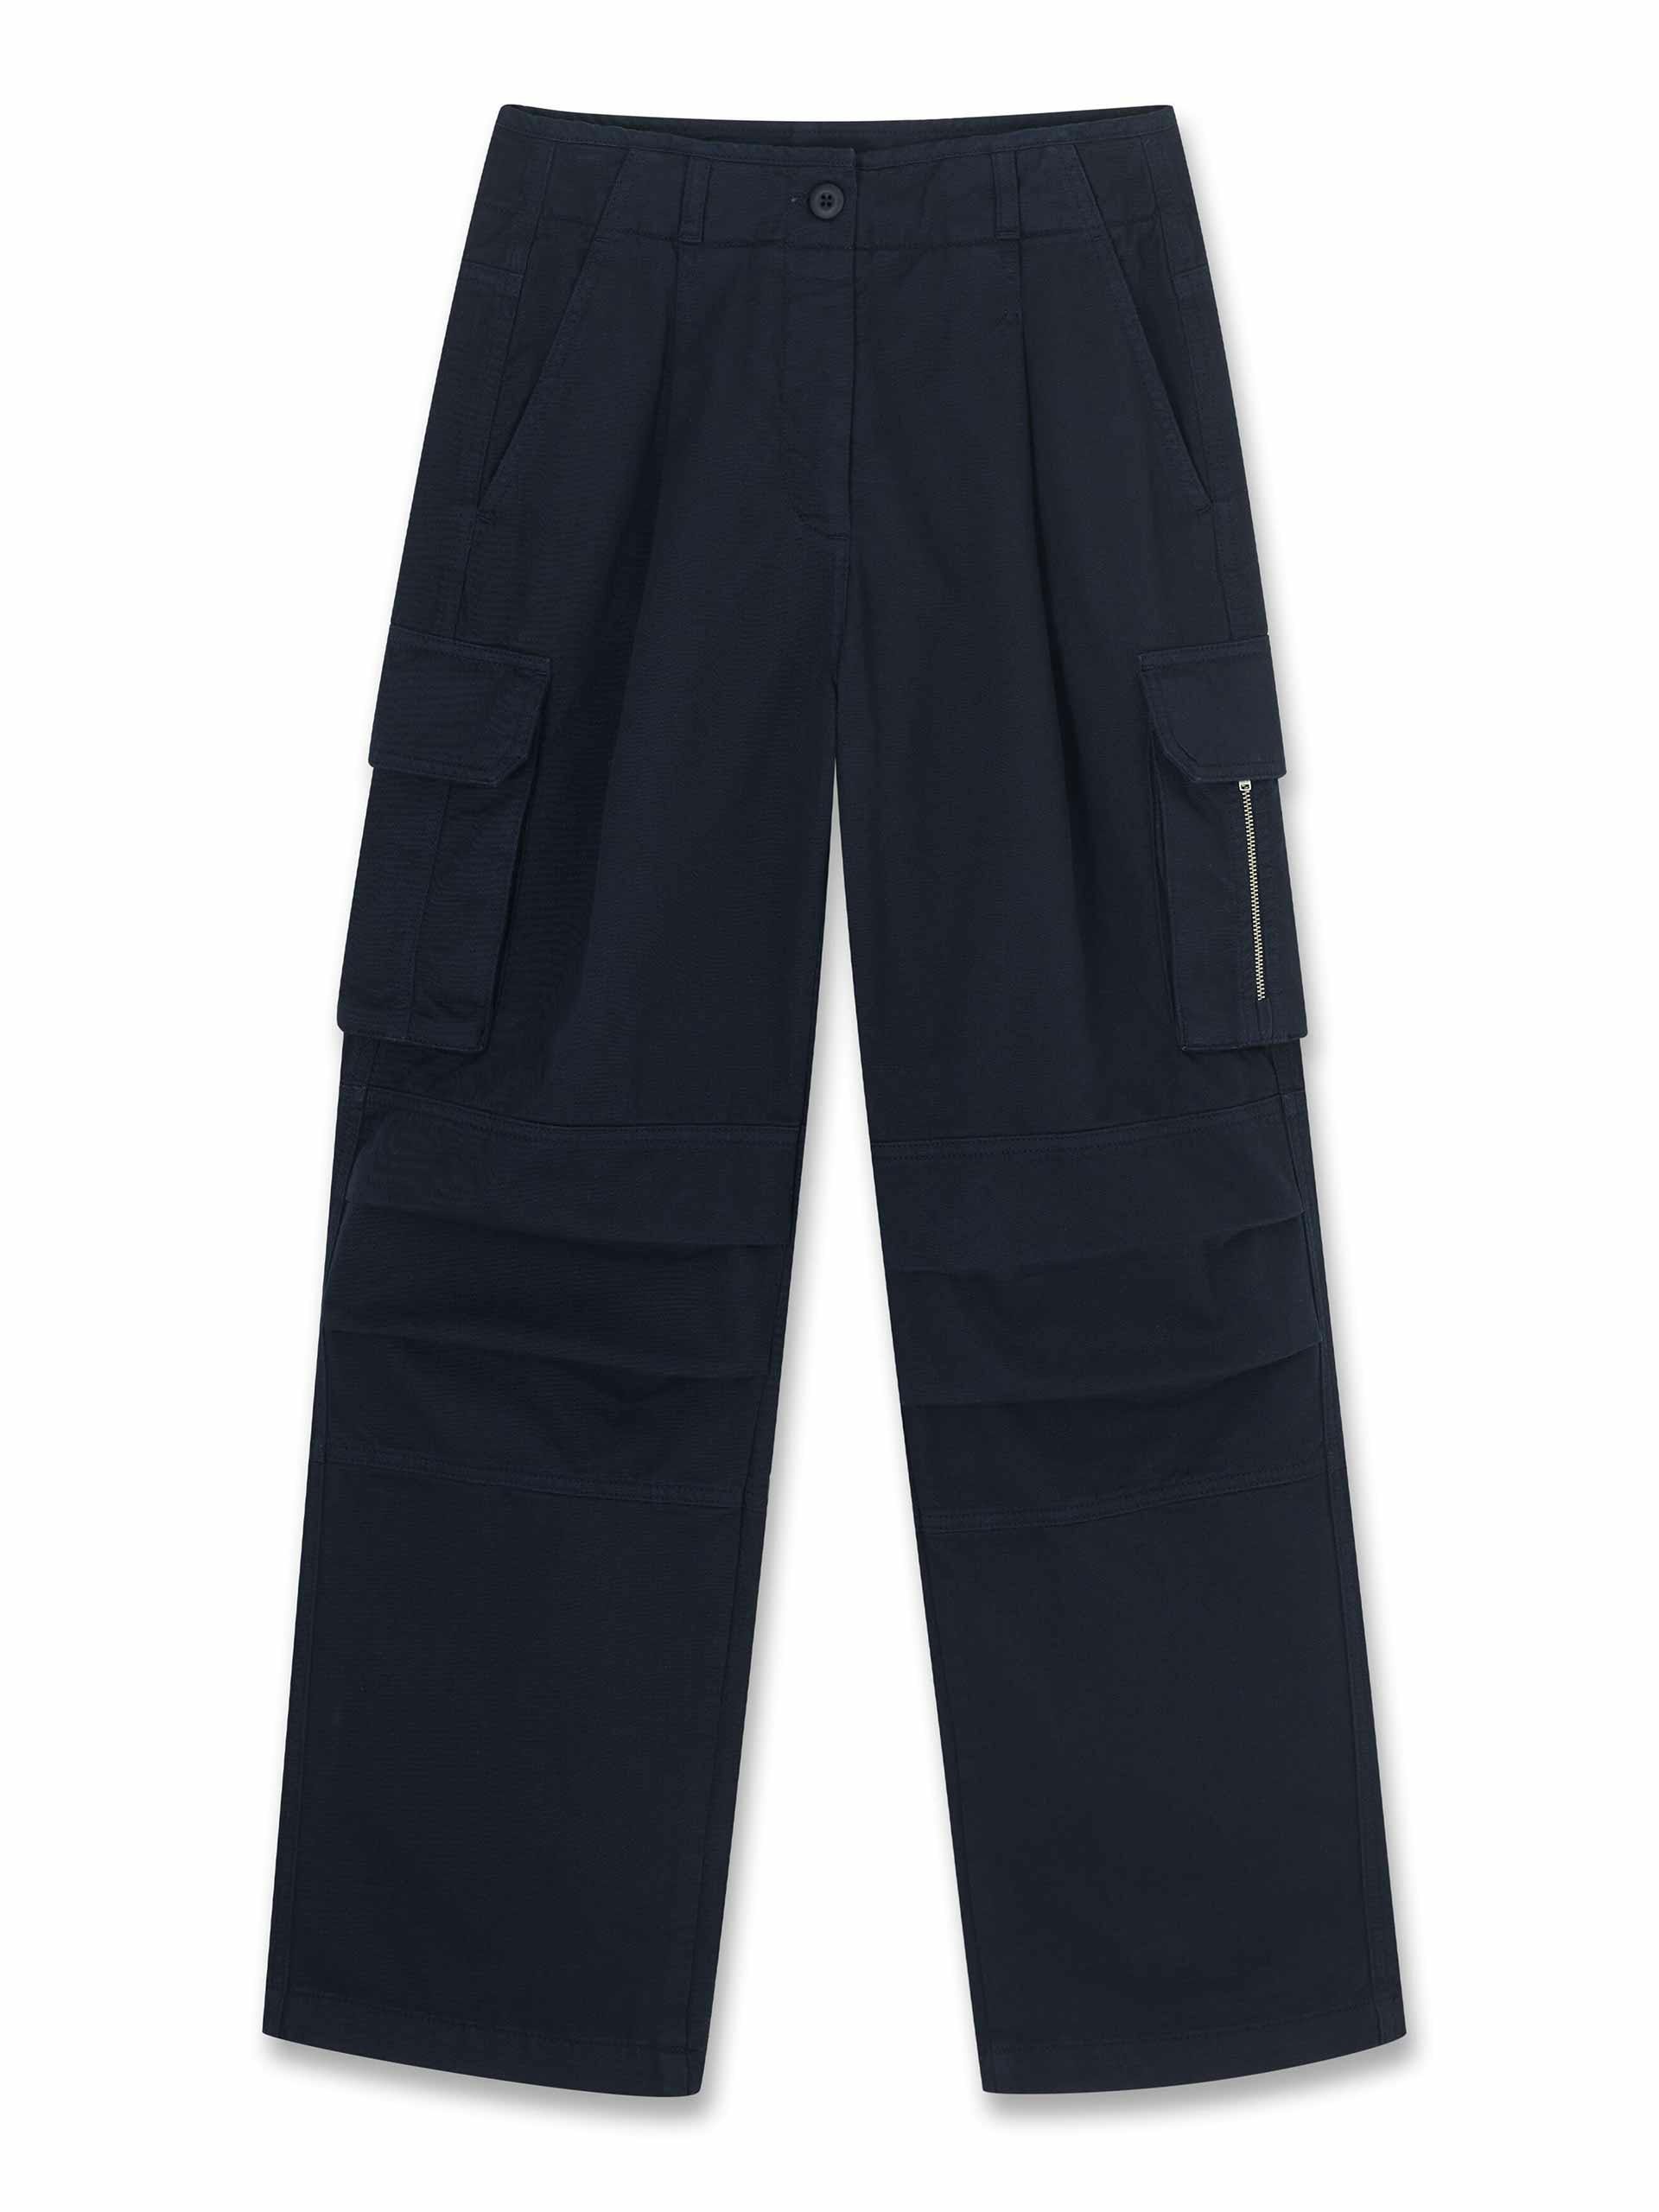 Navy cargo trousers